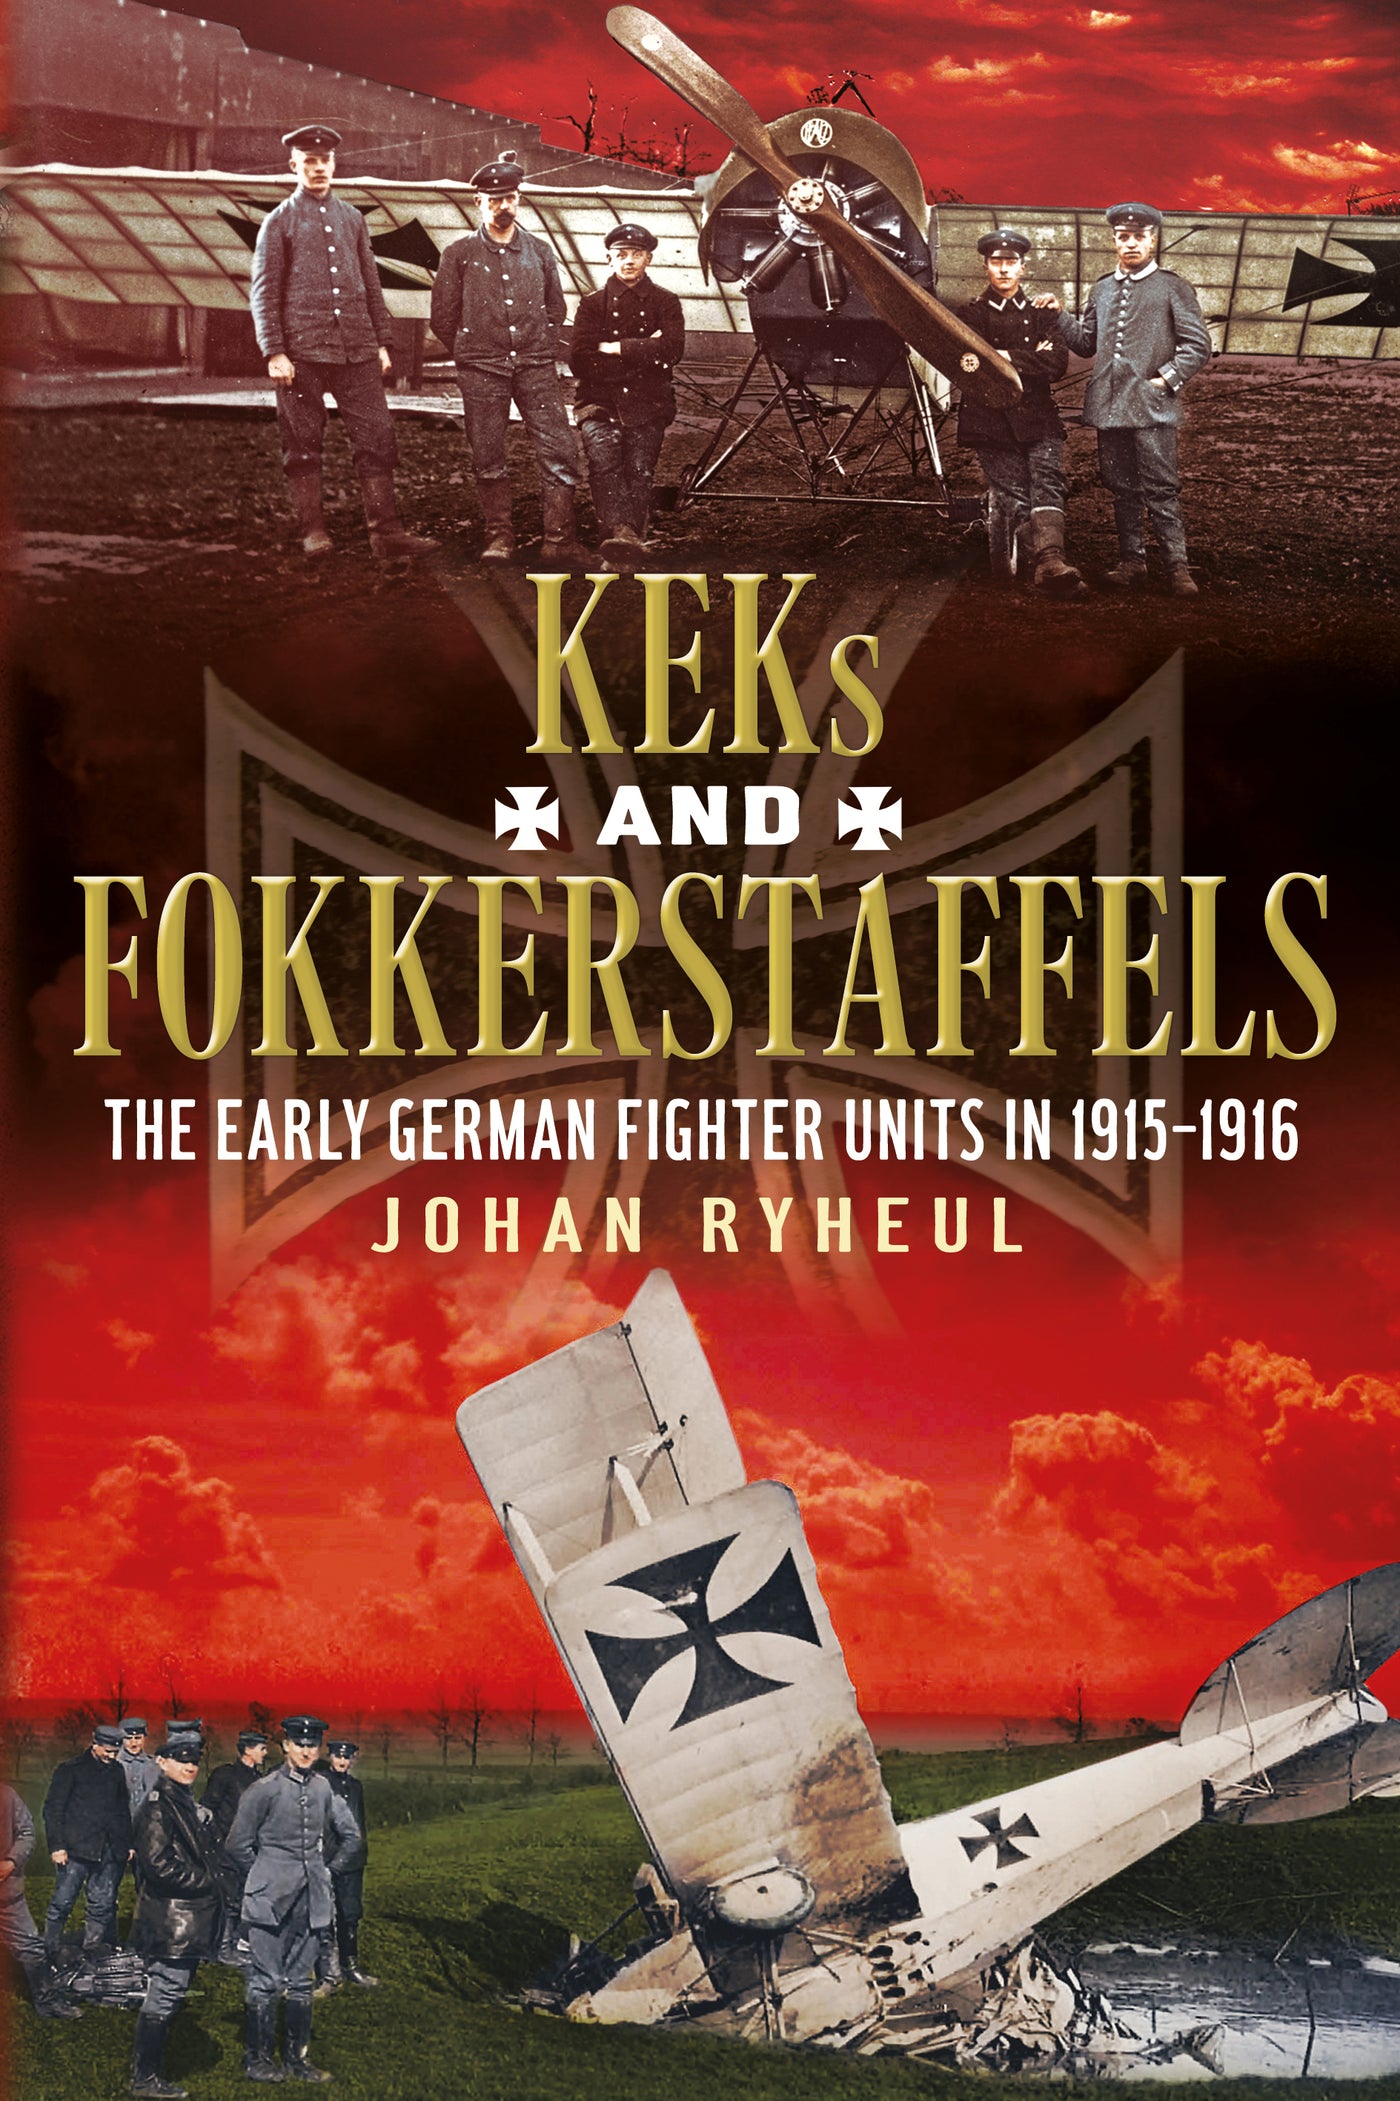 KEK’s and Fokkerstaffels – The early German fighter units in 1915-1916